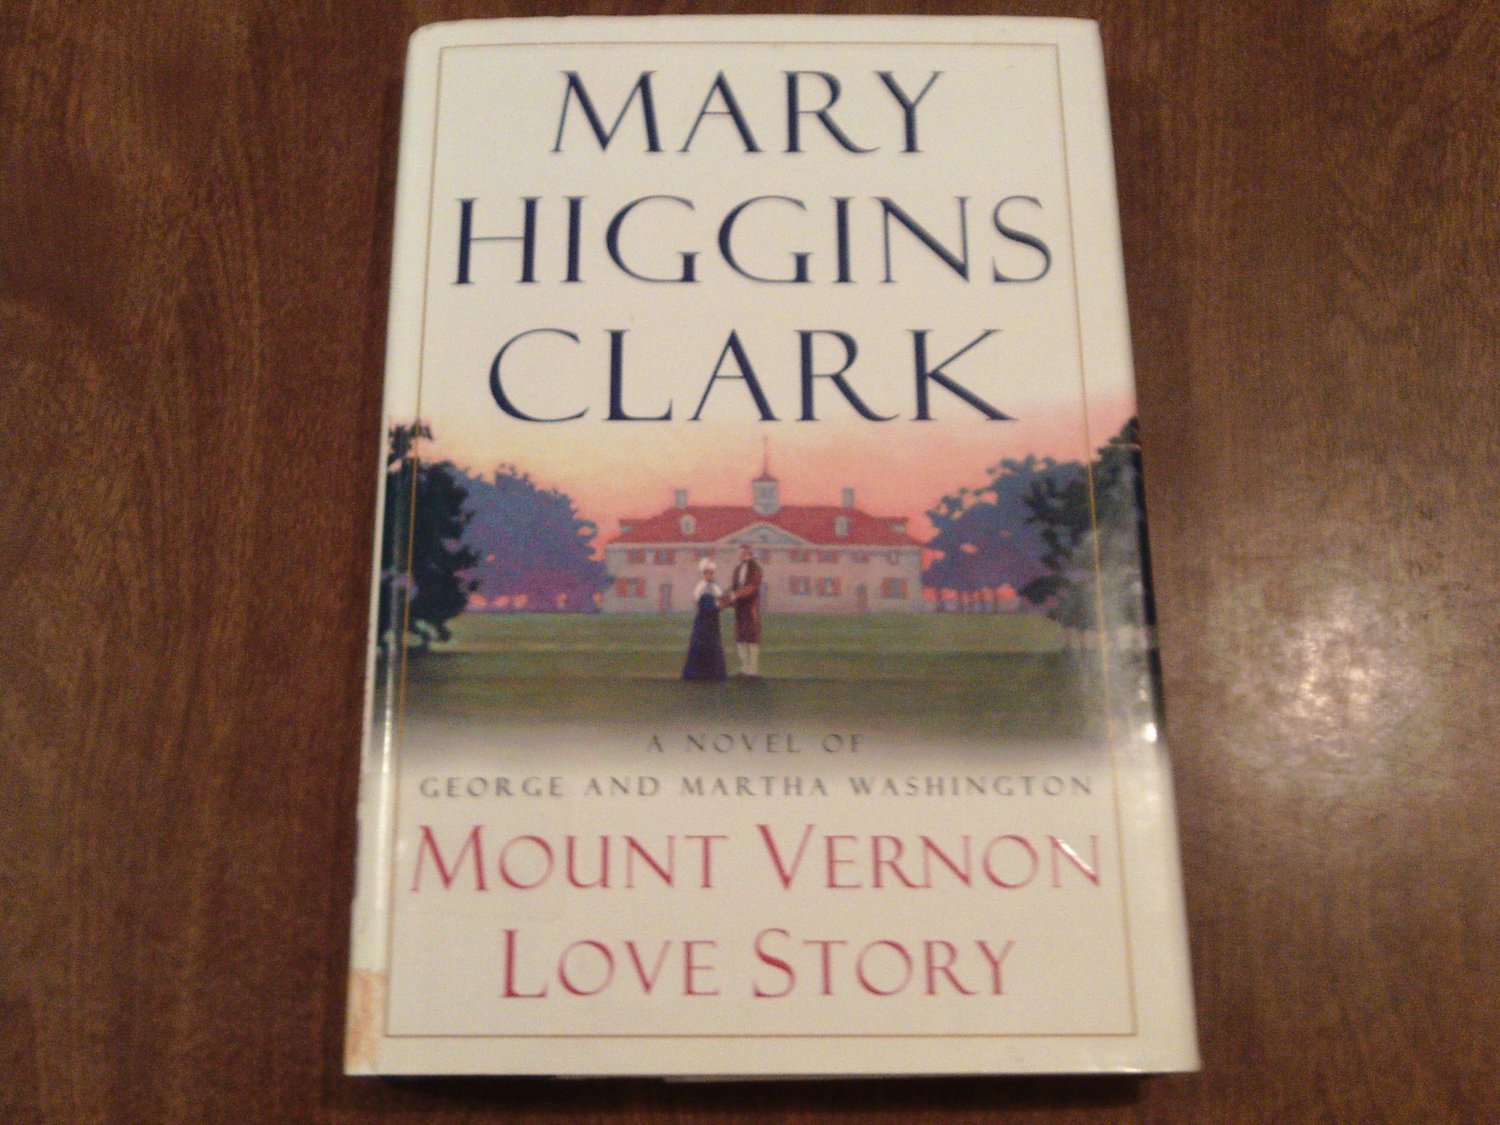 Mount Vernon Love Story by Mary Higgins Clark (2002) (G4A) Historical Romance1500 x 1125